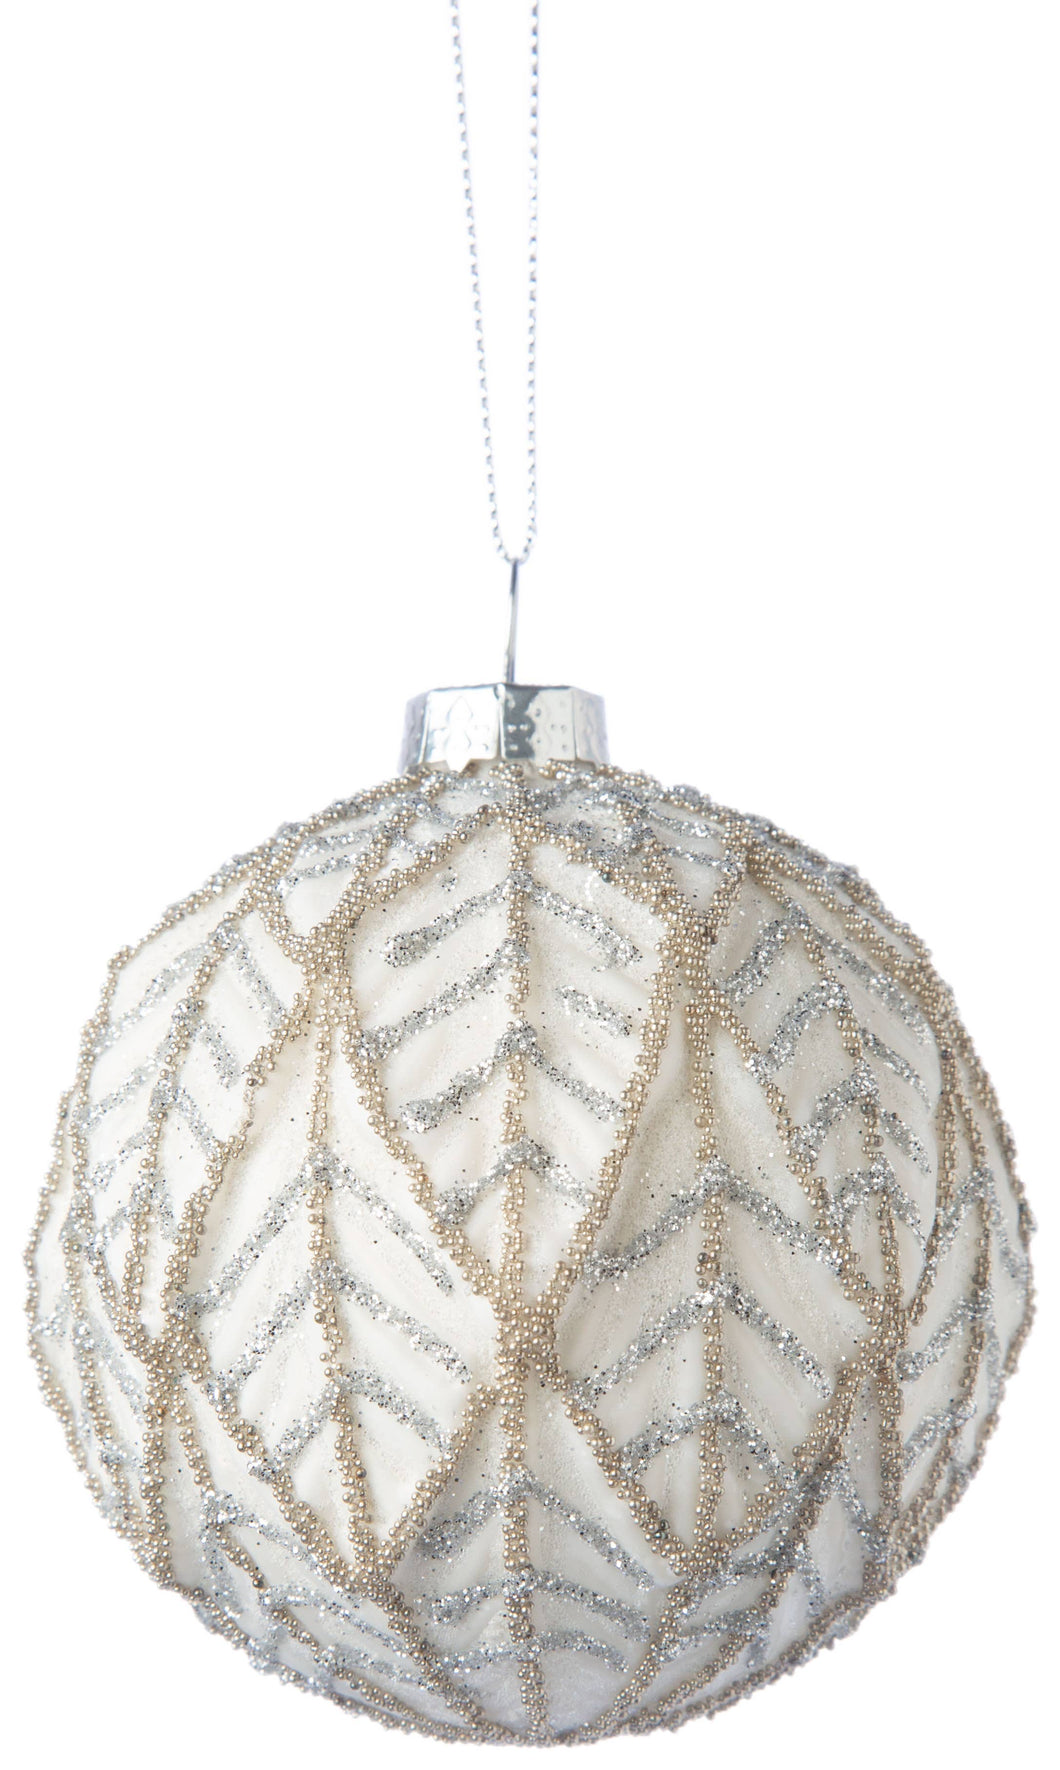 Glass Ball Ornament w/White Molded Leaf Pattern